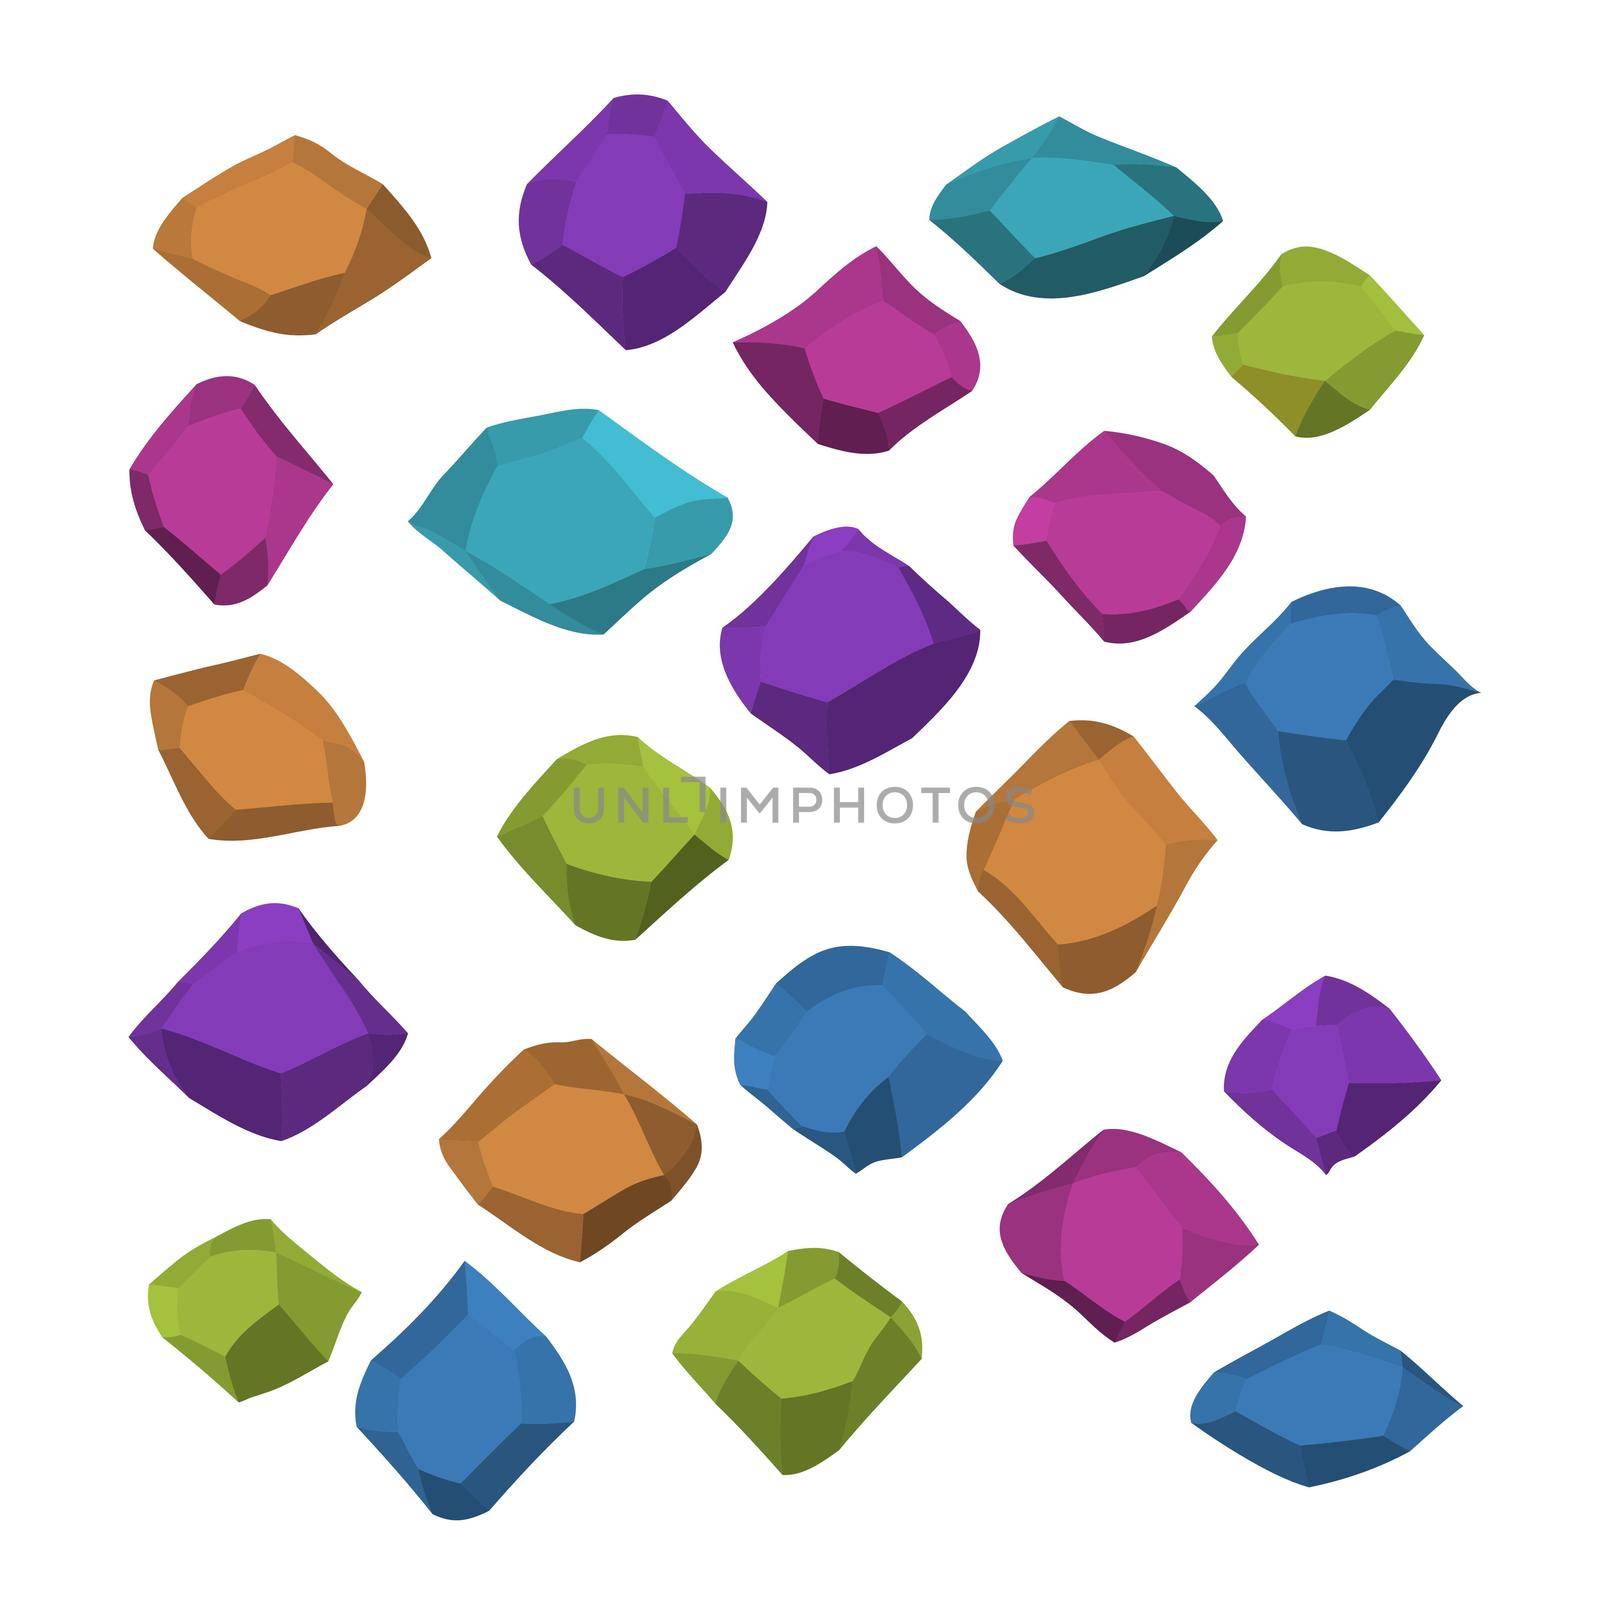 Cartoon stones. Rock stone isometric set. Colorful boulders, natural building block shapes, wall stones. 3d flat isolated illustration. Vector collection by allaku